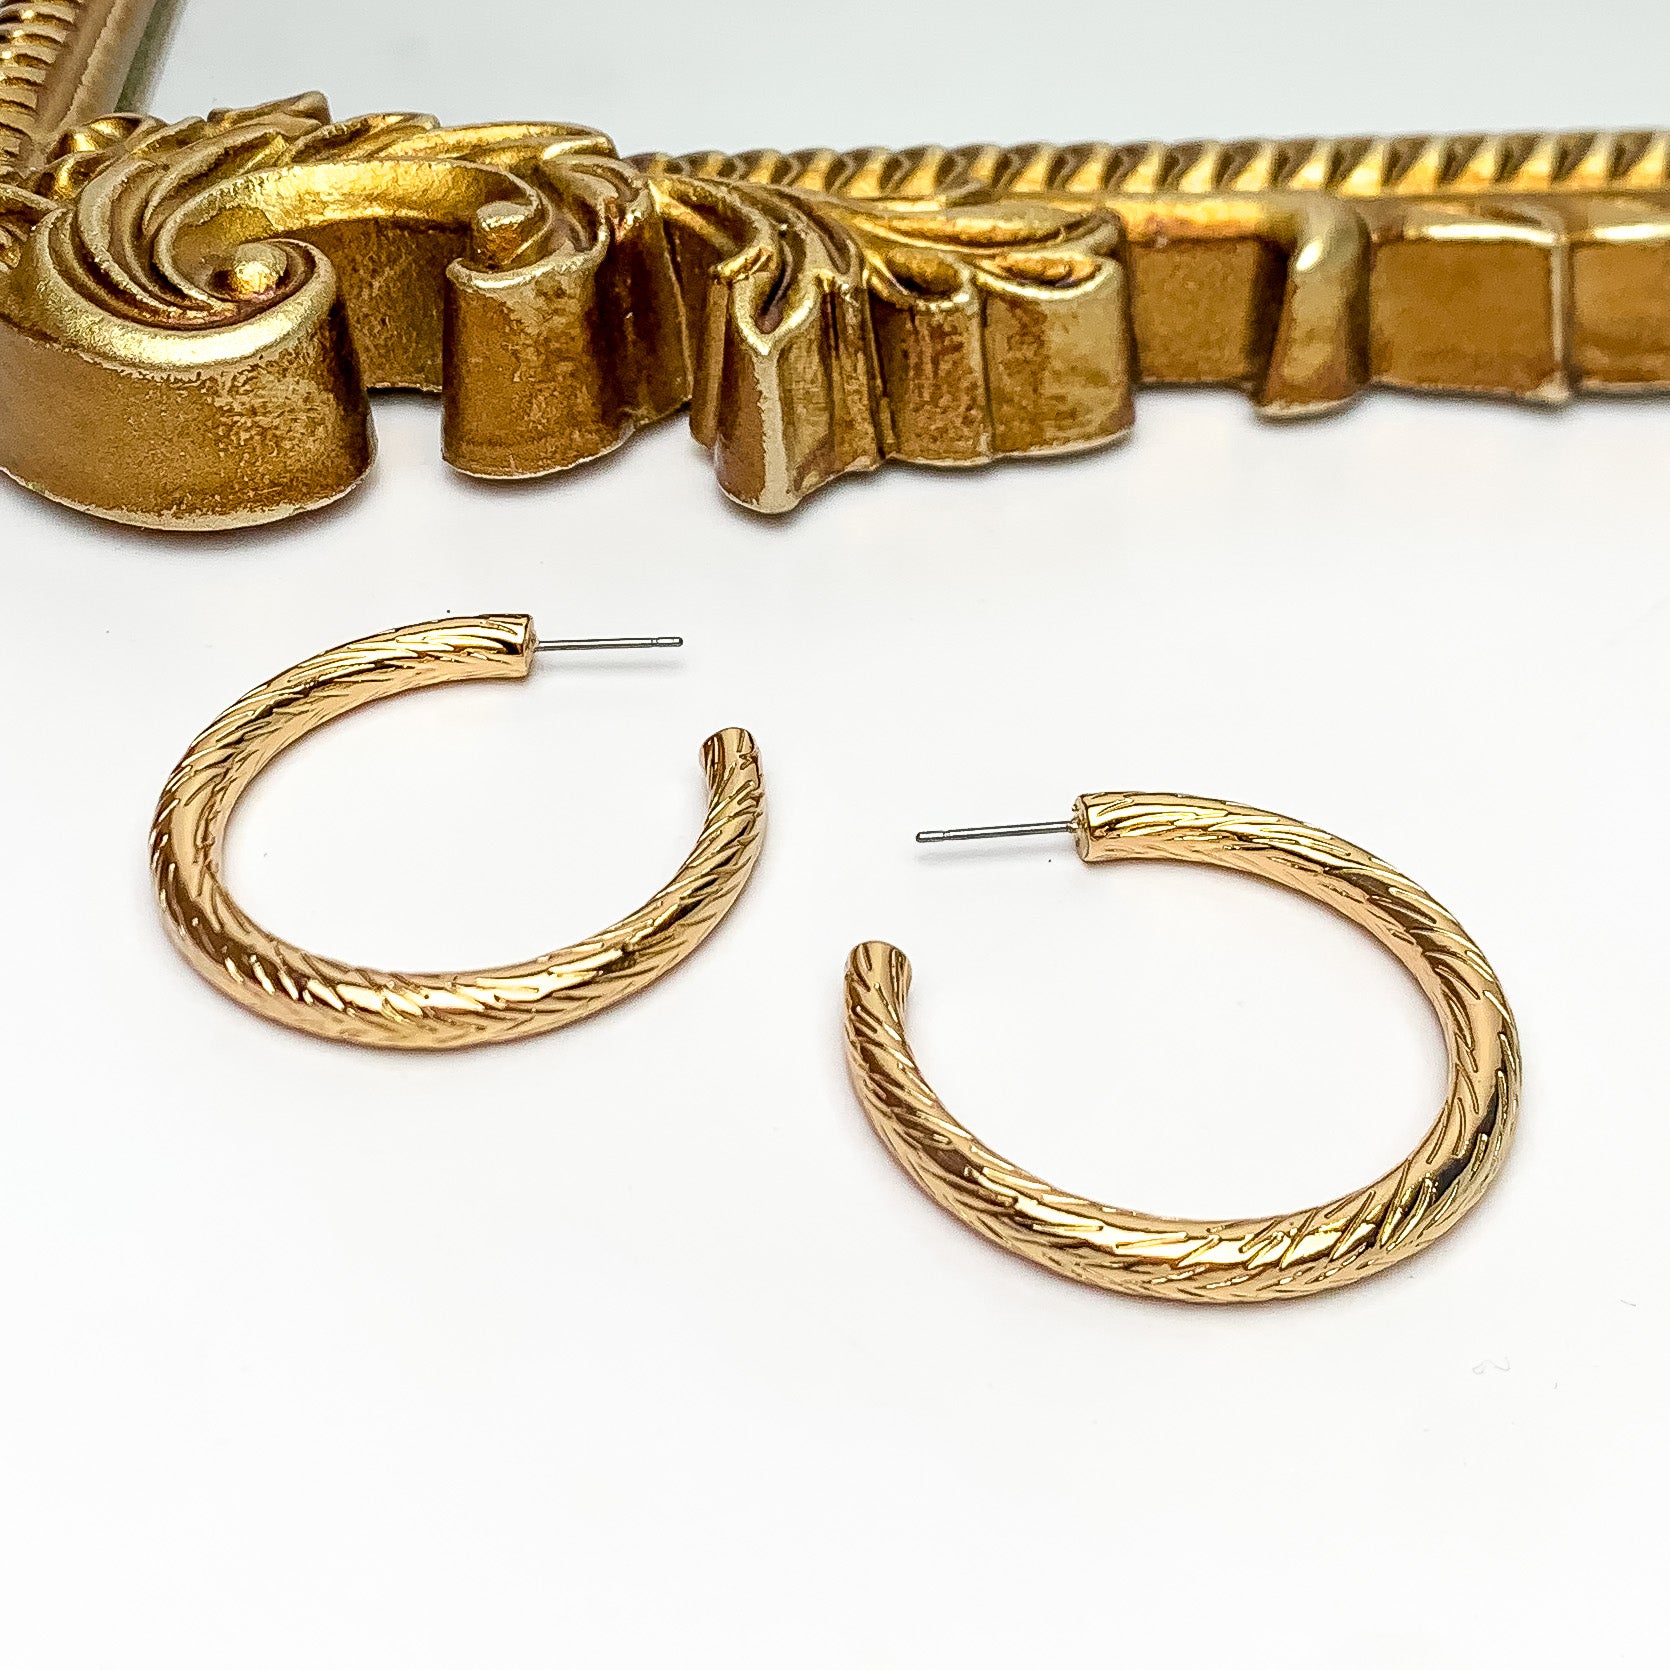 Gold Tone Large Twisted Hoop Earrings. Pictured on a white background with a gold frame above the earrings.